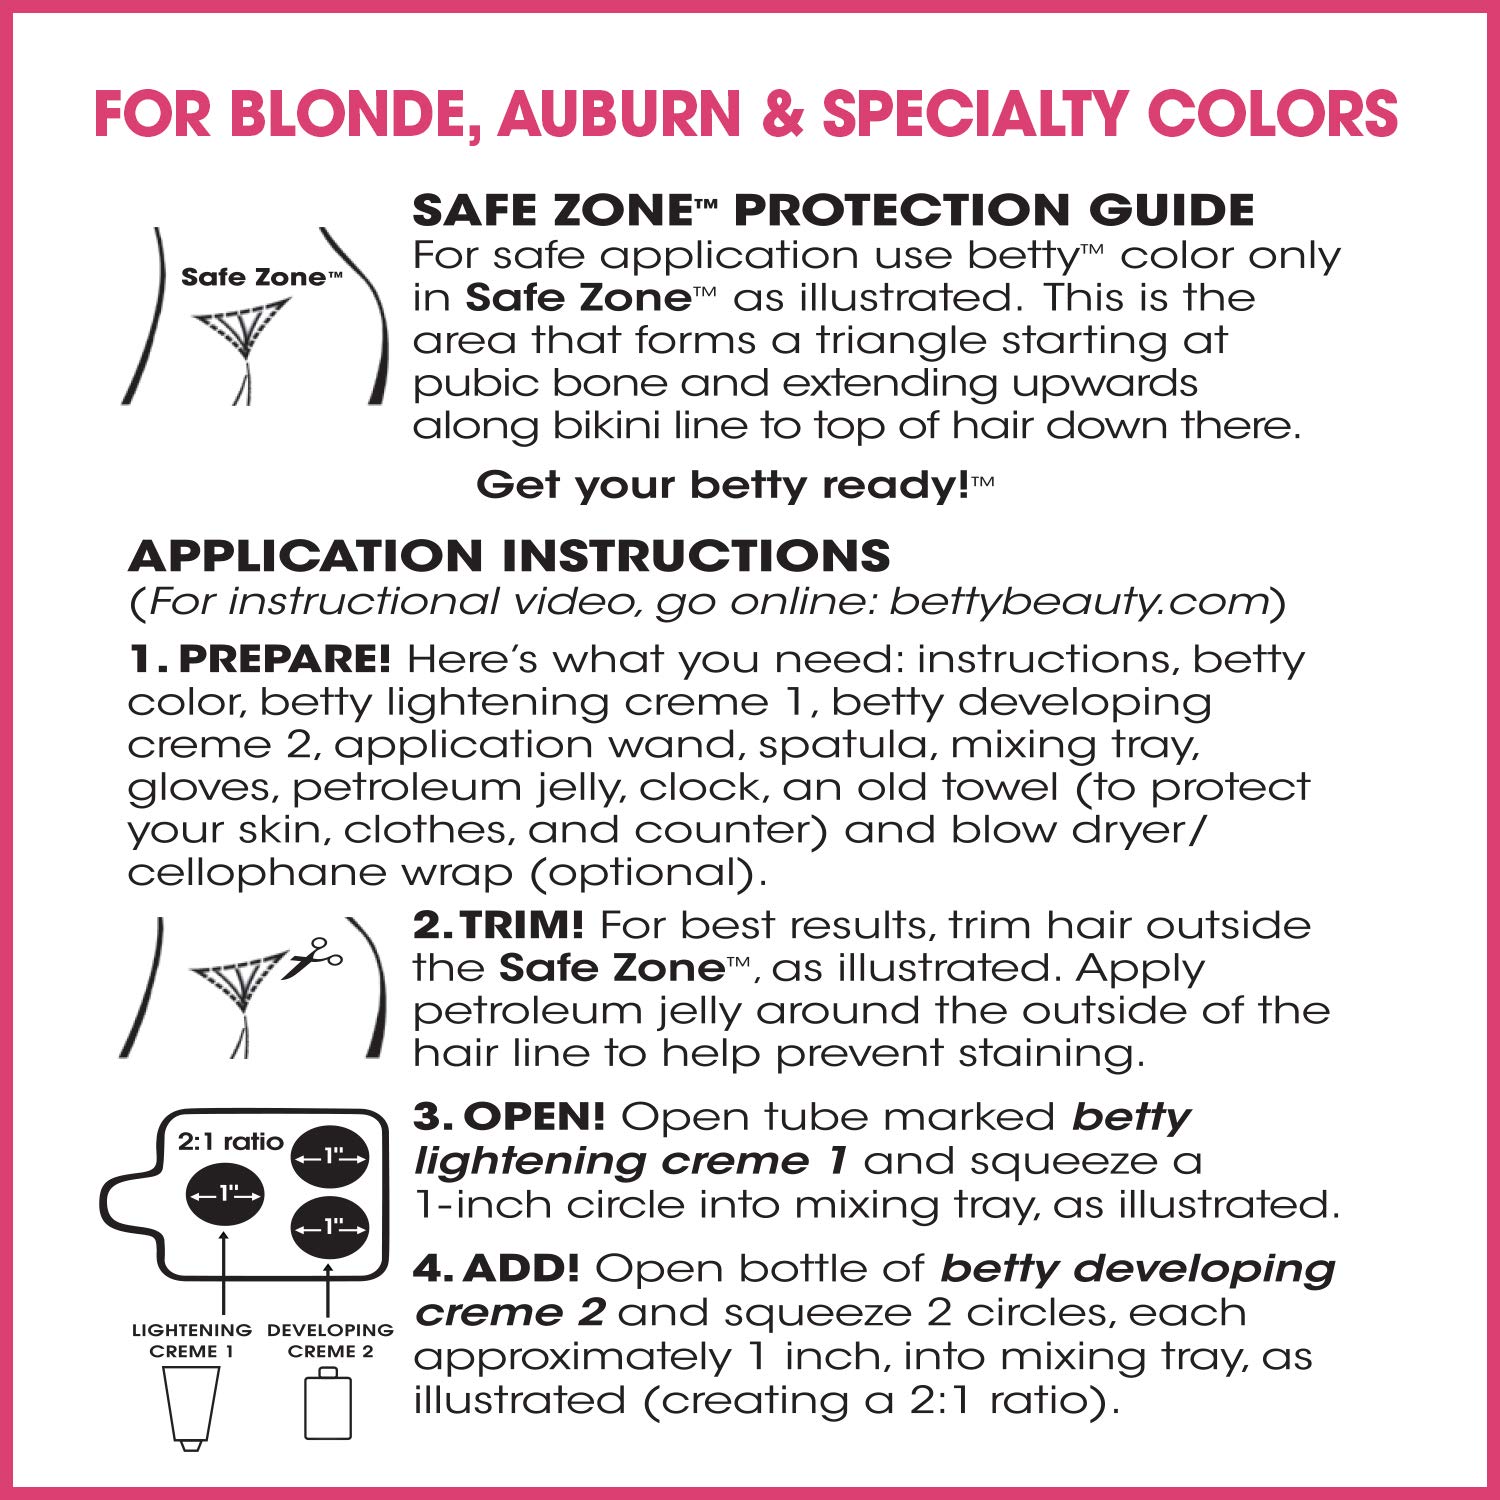 Betty Beauty Blonde Betty - Color for the Hair Down There Hair Coloring Kit